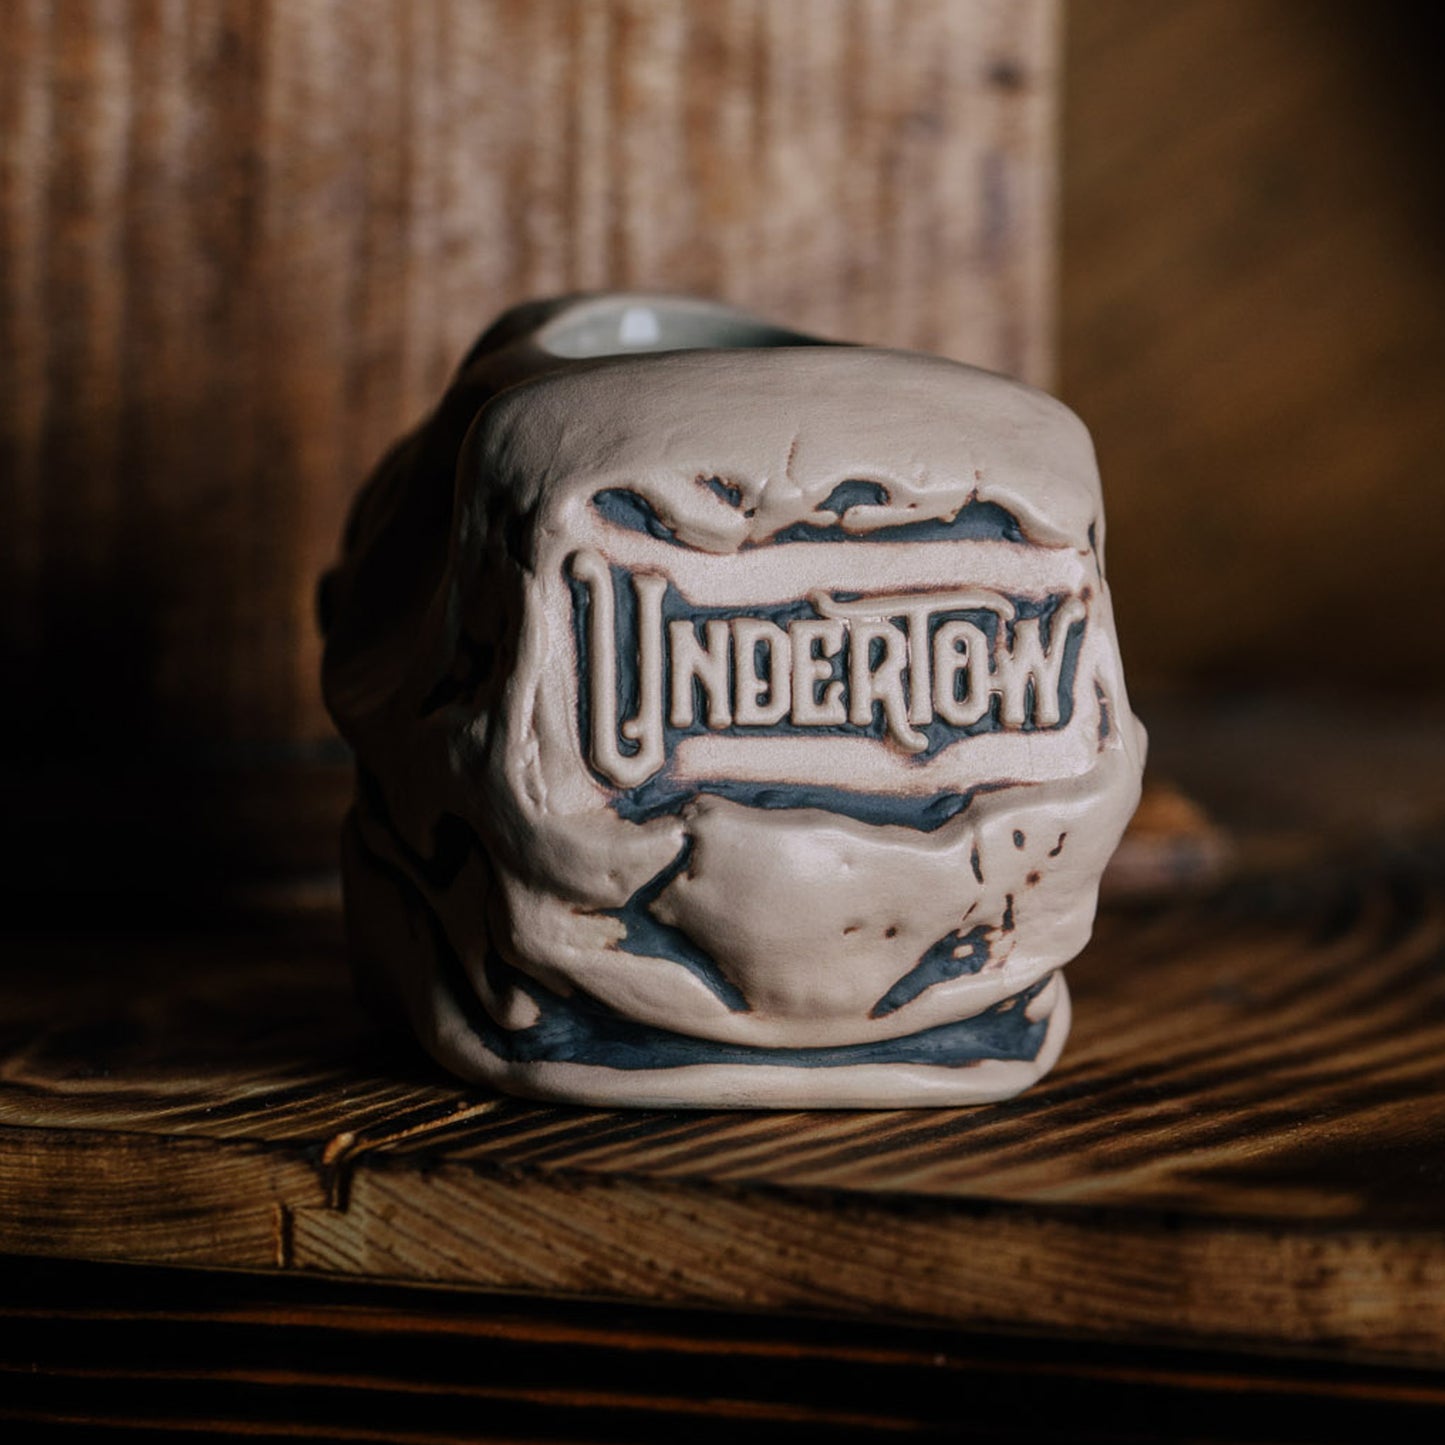 Never Drink From a "Parrot Skull" by UnderTow produced by Tiki Farm